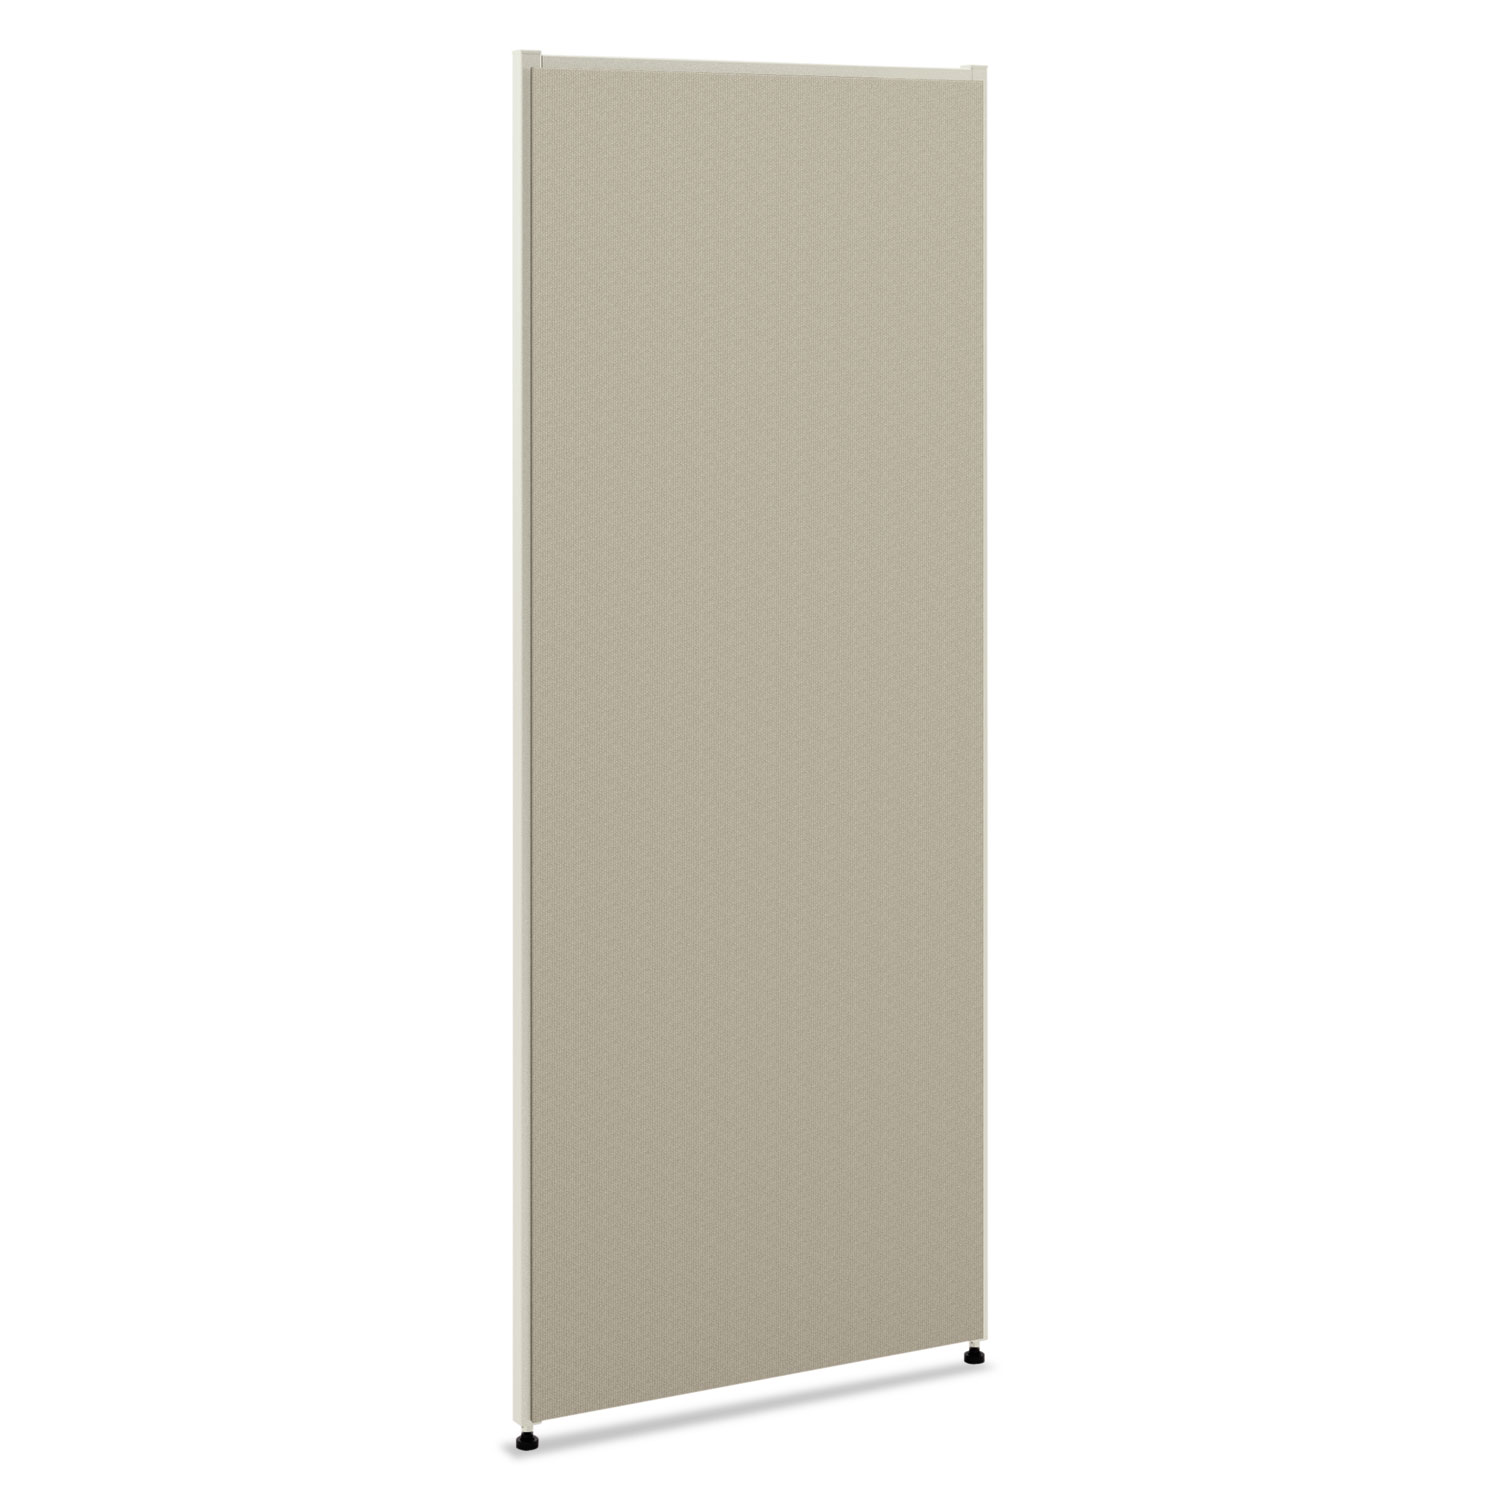 Basyx BSXP6036GYGY Vers&#233; Office Panel, 36w x 60h, Gray